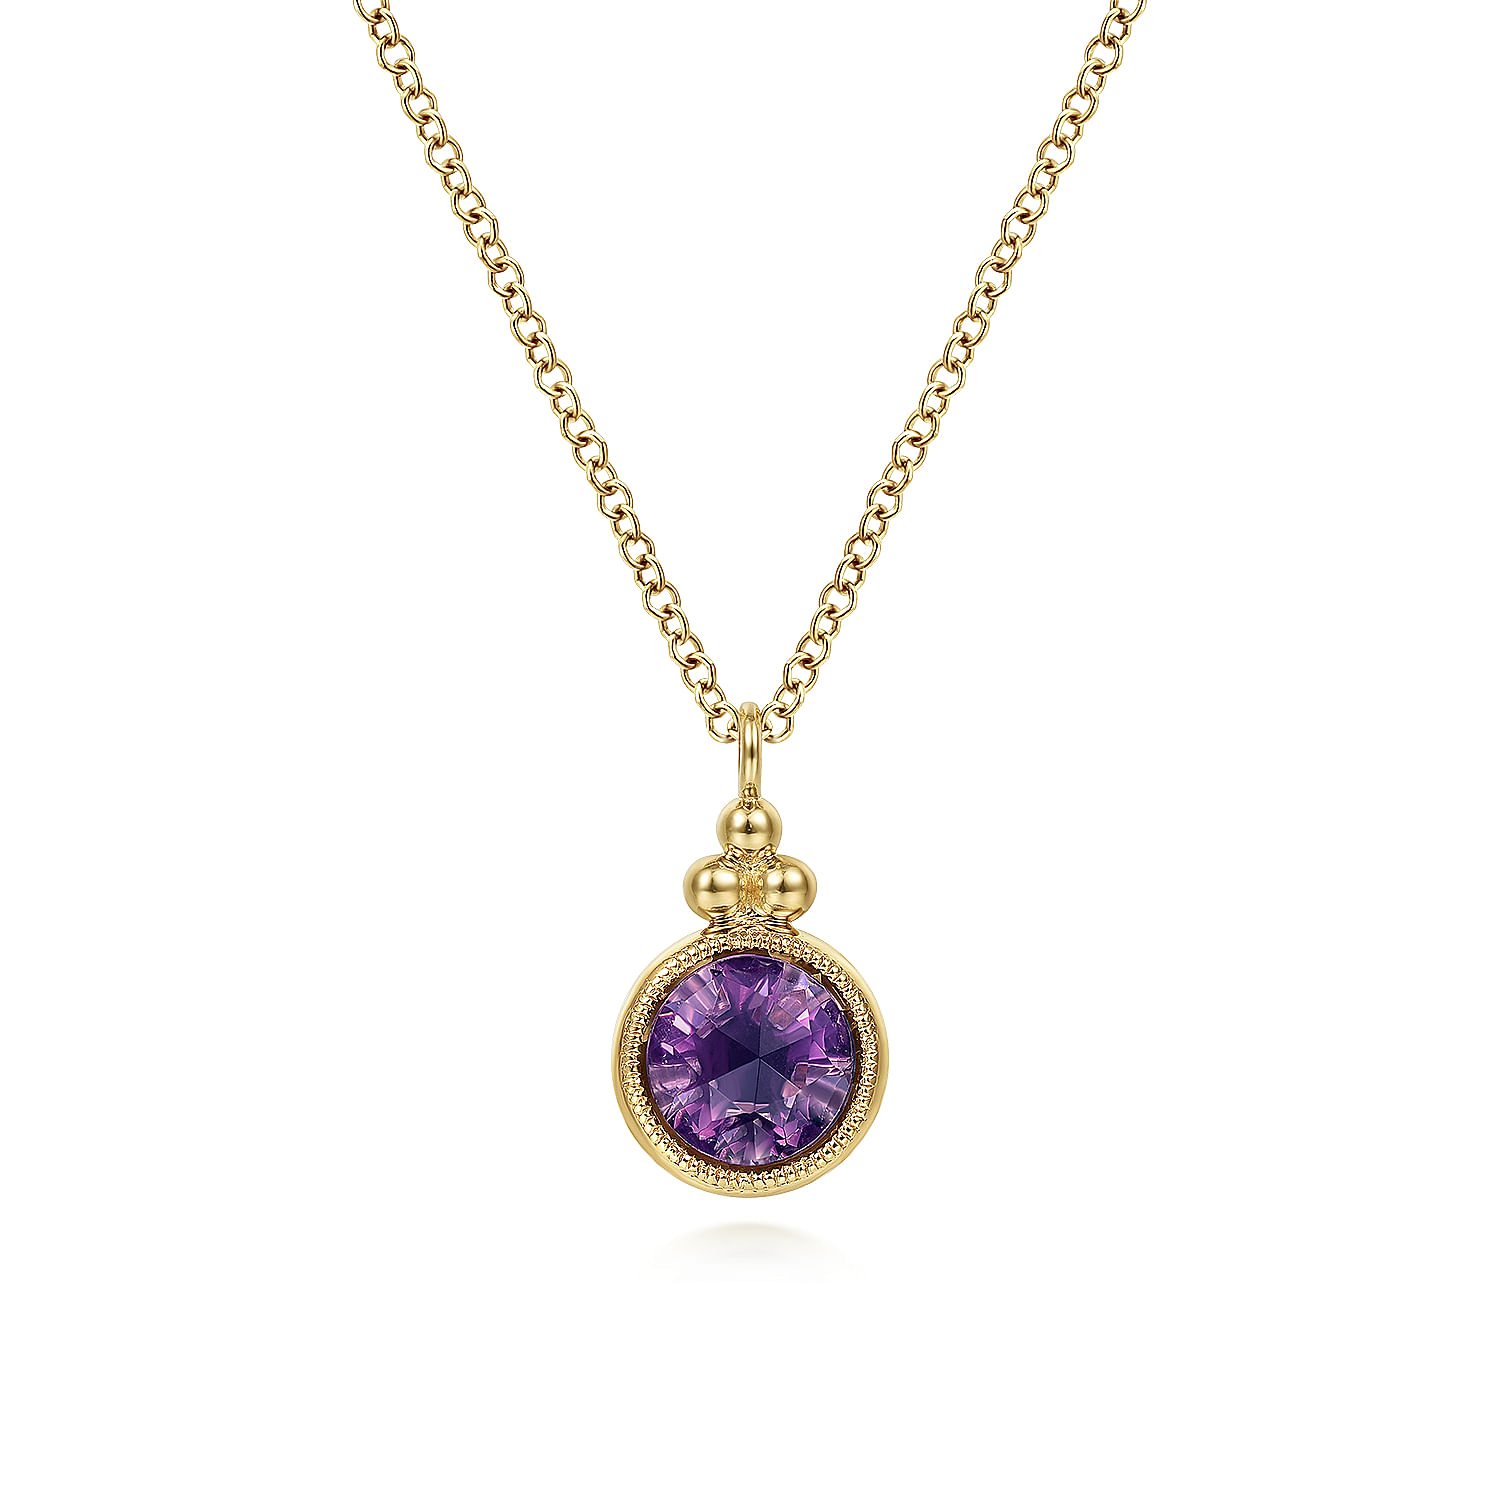 14K Yellow Gold Round Amethyst Pendant Necklace